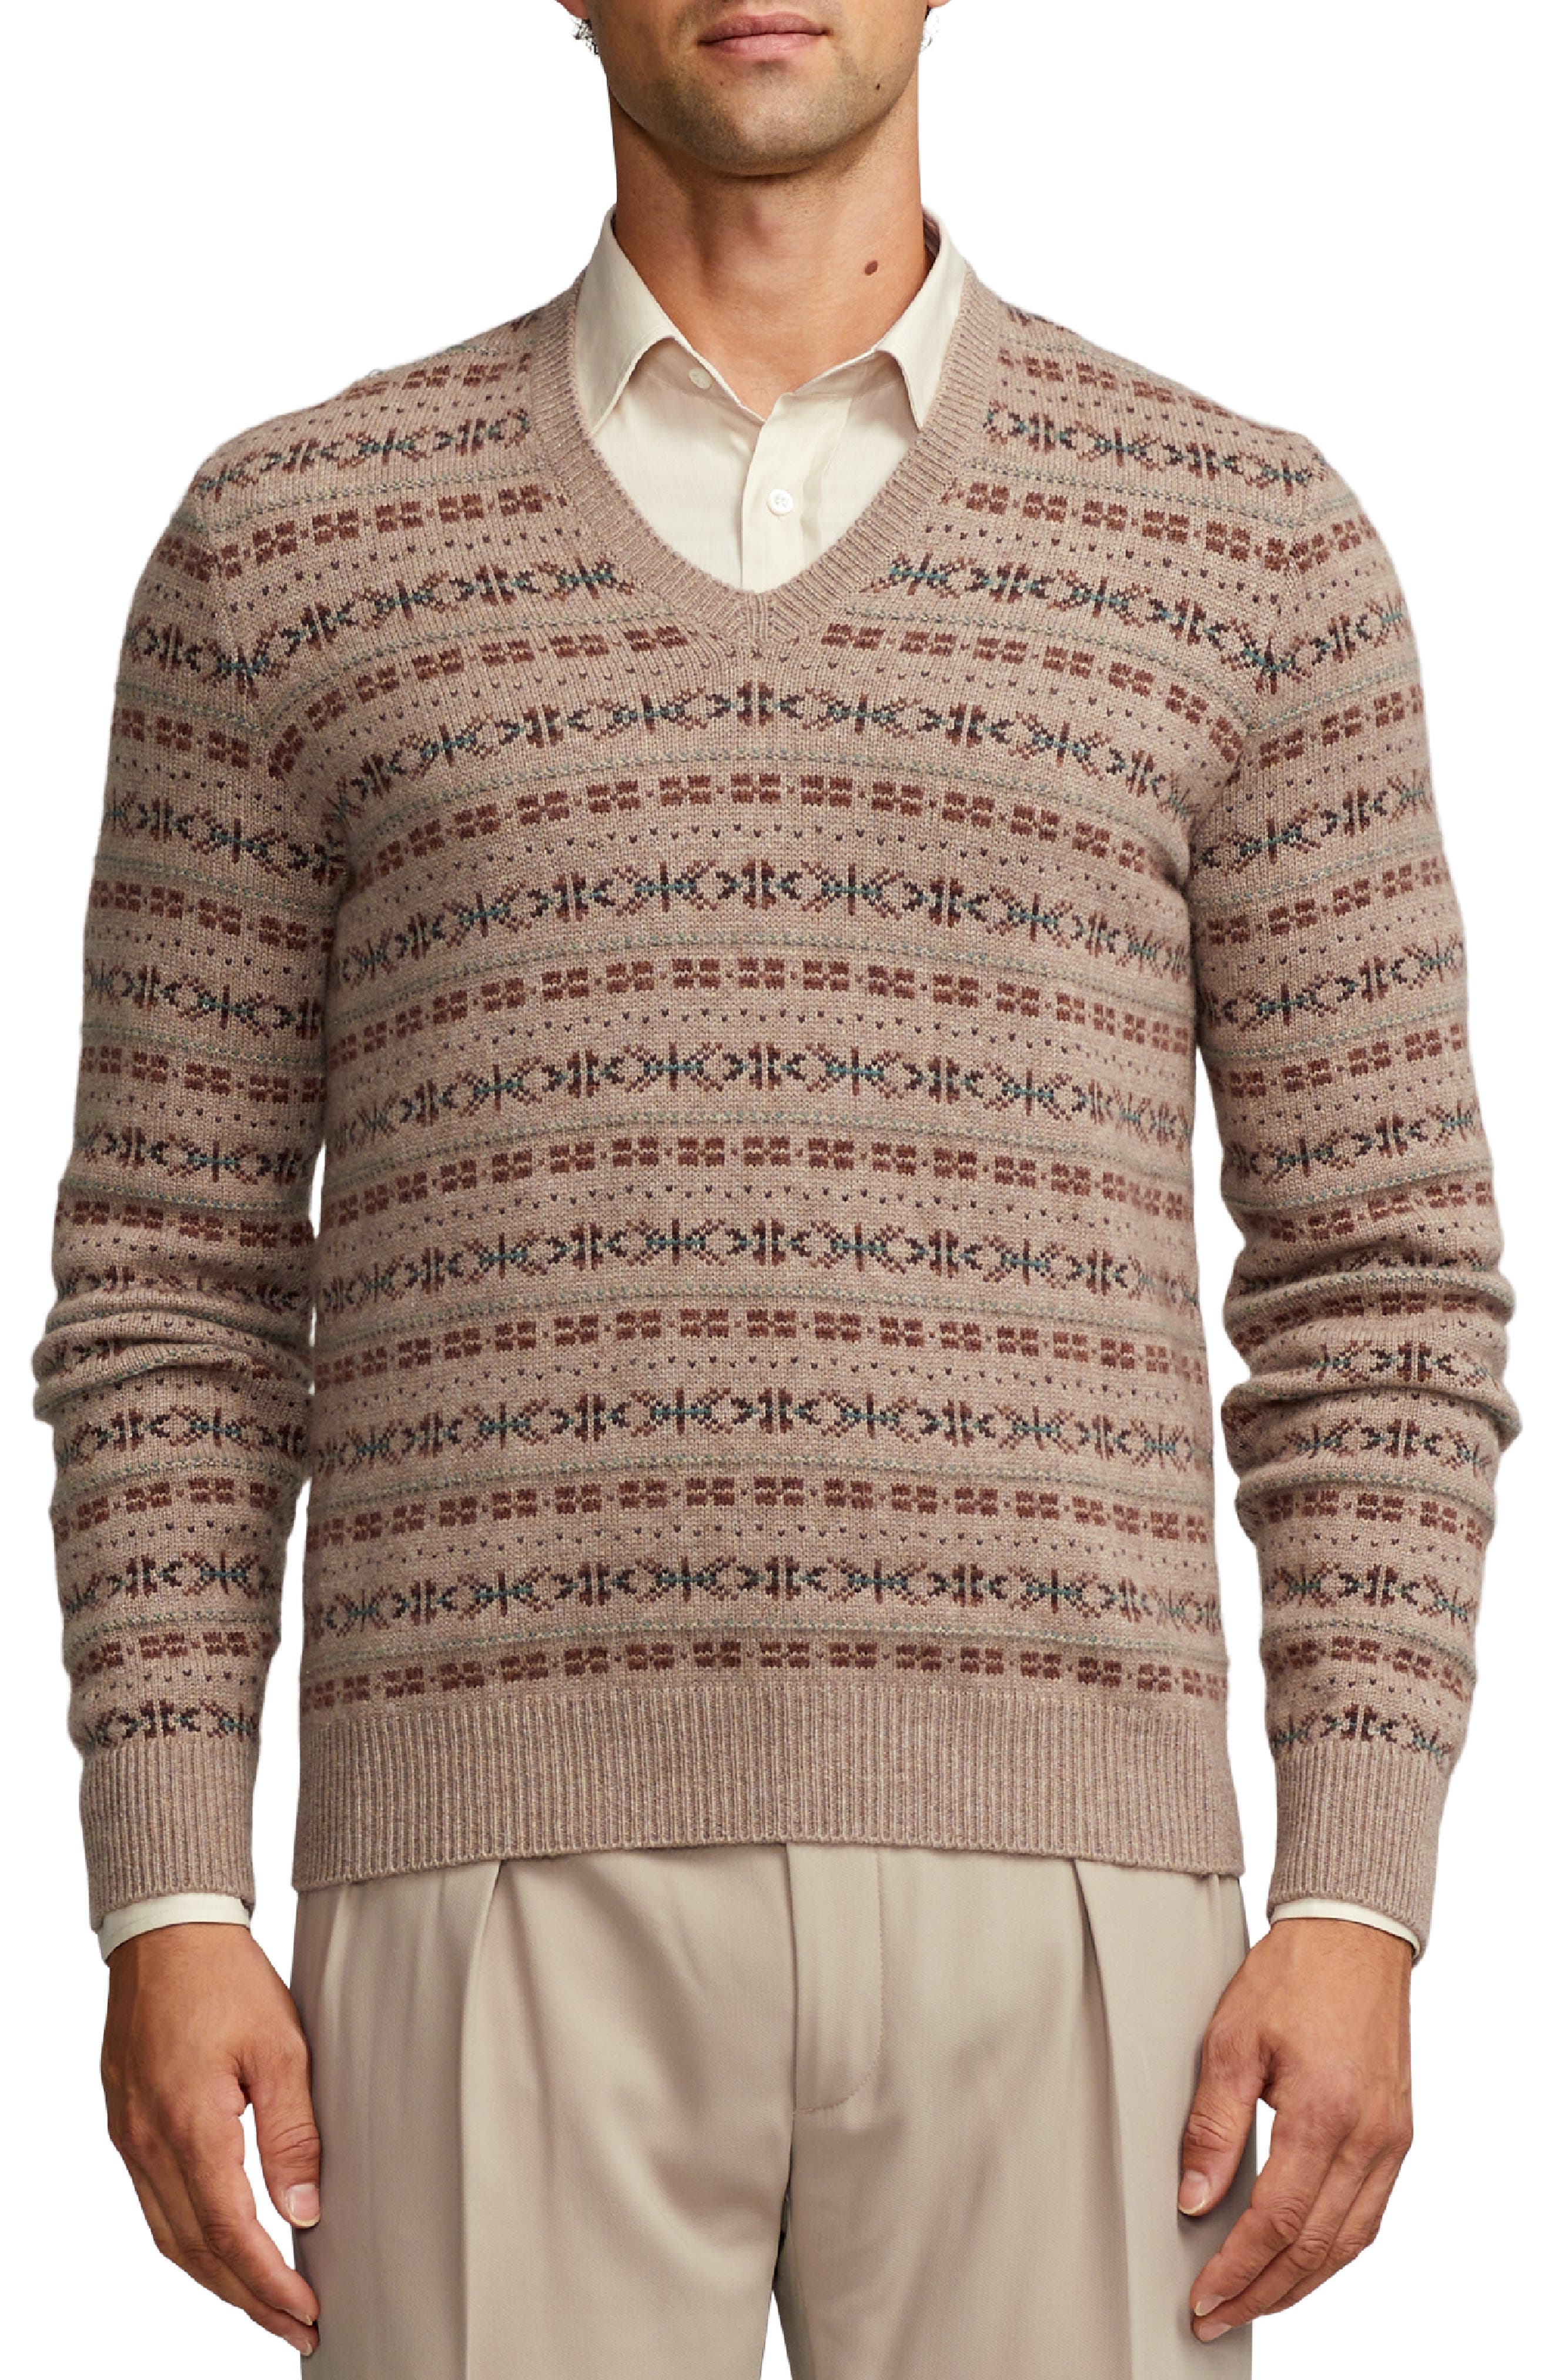 Ralph Lauren Purple Label Taupe #39;The Iconic#39; Sweater